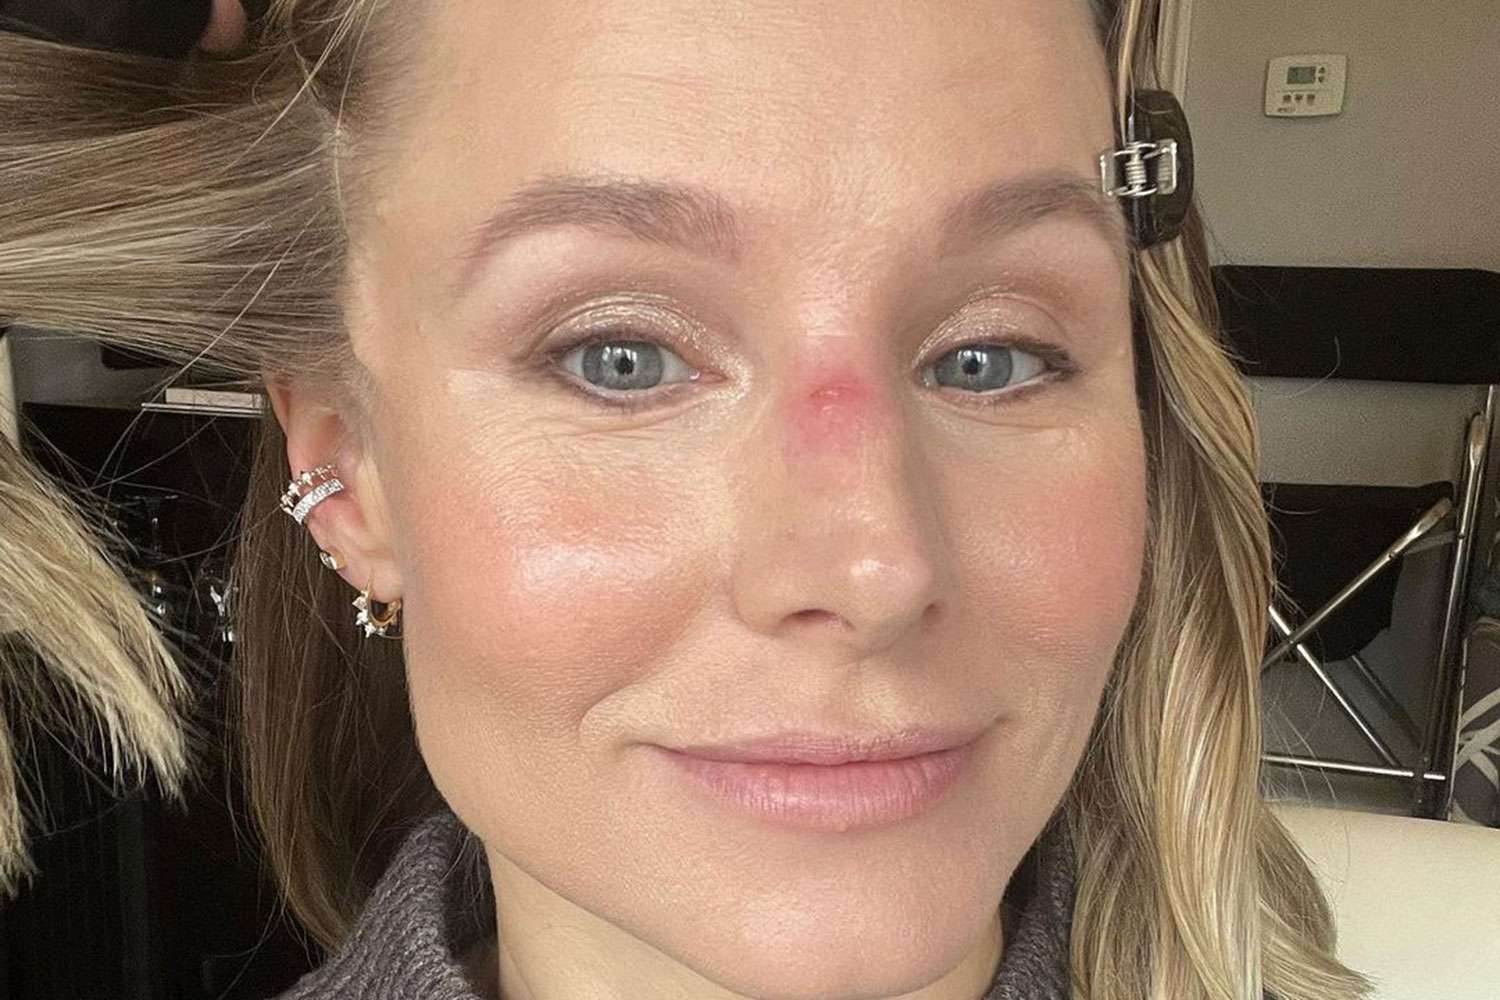 Kristen Bell, known for her comedic roles, recently revealed she got a nose injury while training jujitsu with her daughter.